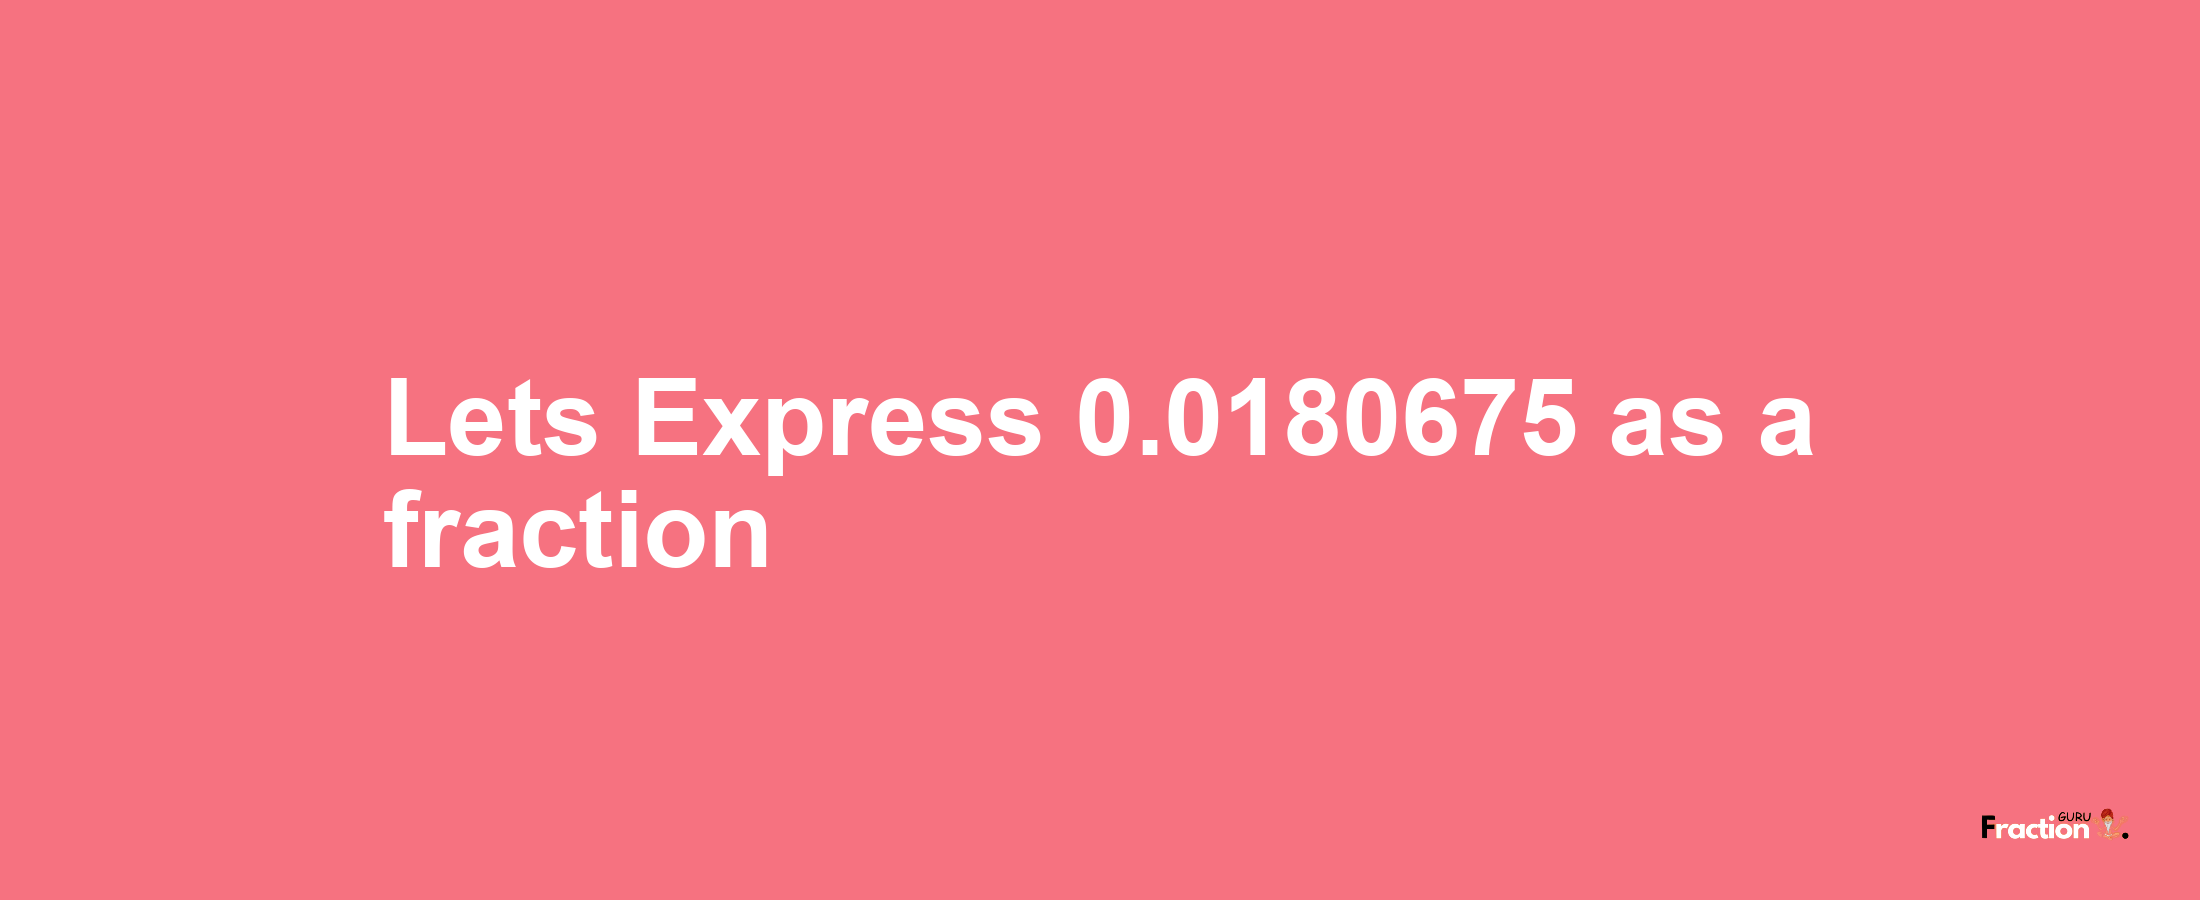 Lets Express 0.0180675 as afraction